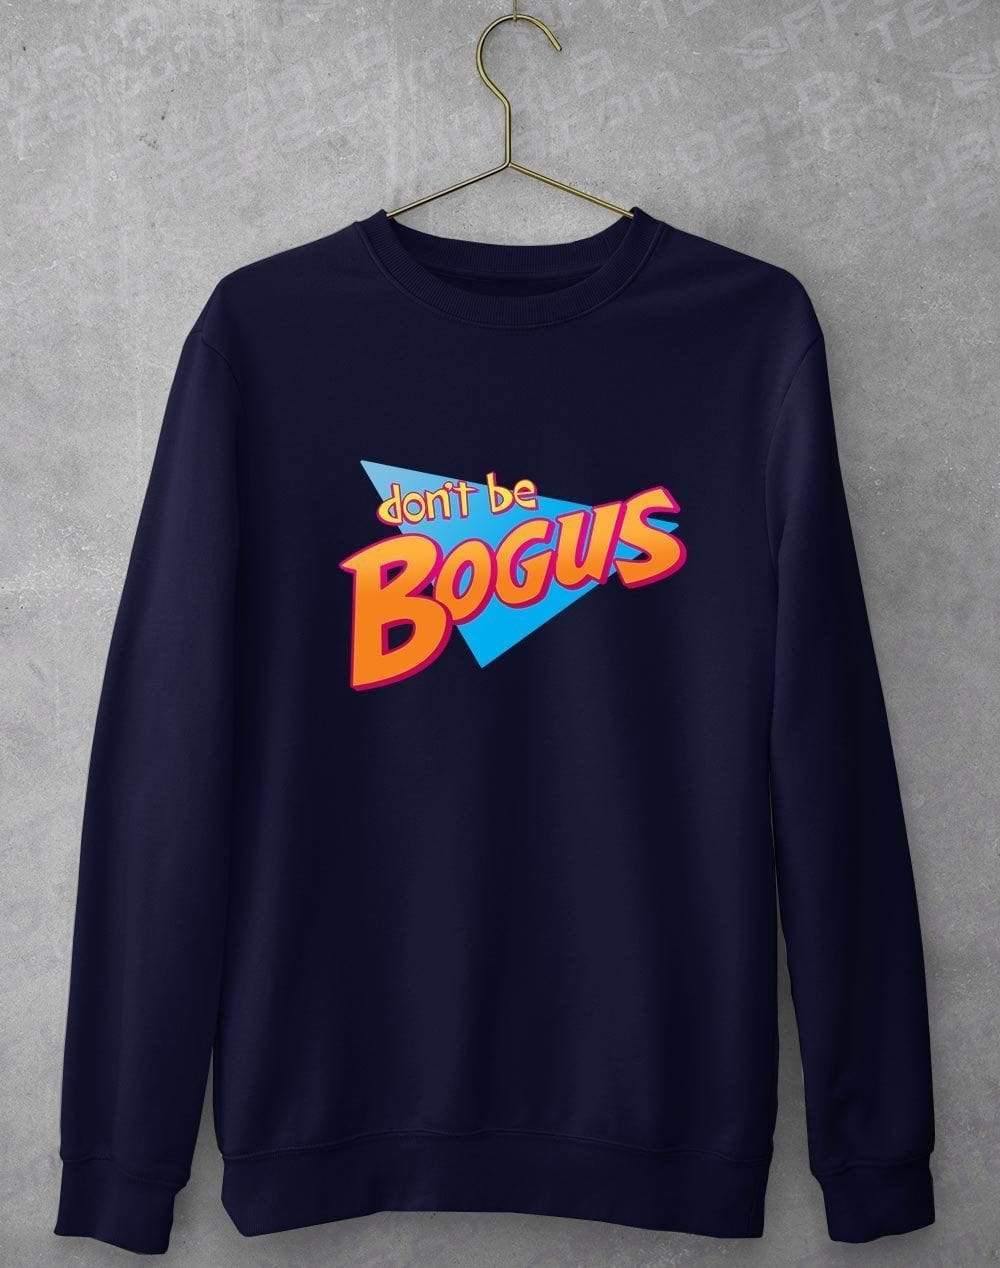 Dont be Bogus Sweatshirt S / Oxford Navy  - Off World Tees